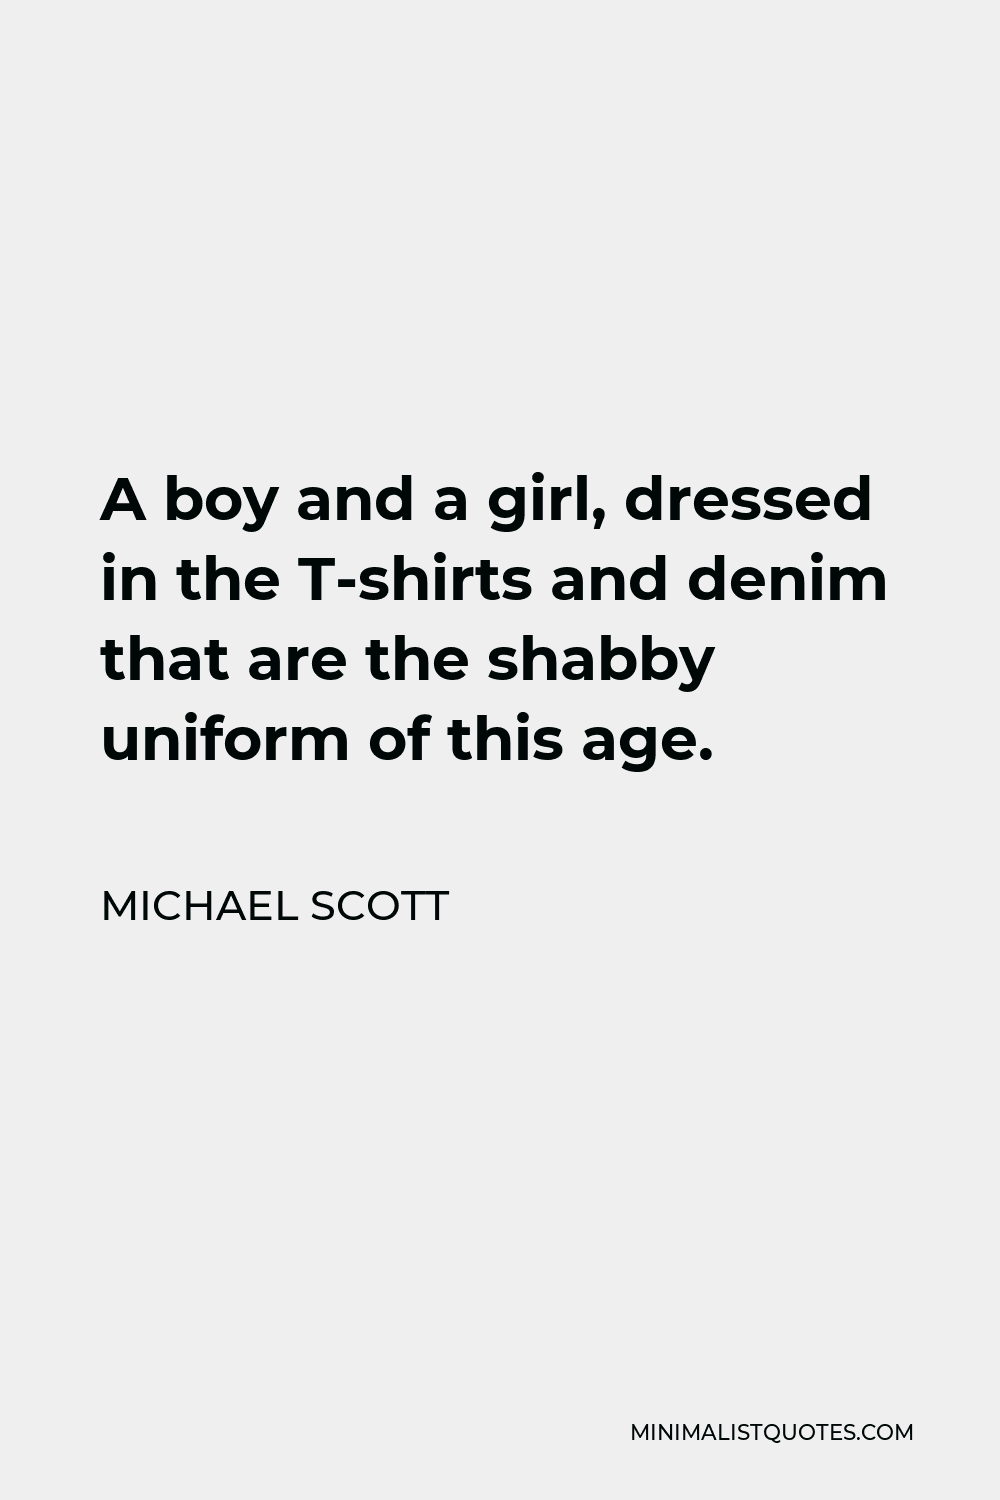 Michael Scott Quote - A boy and a girl, dressed in the T-shirts and denim that are the shabby uniform of this age.